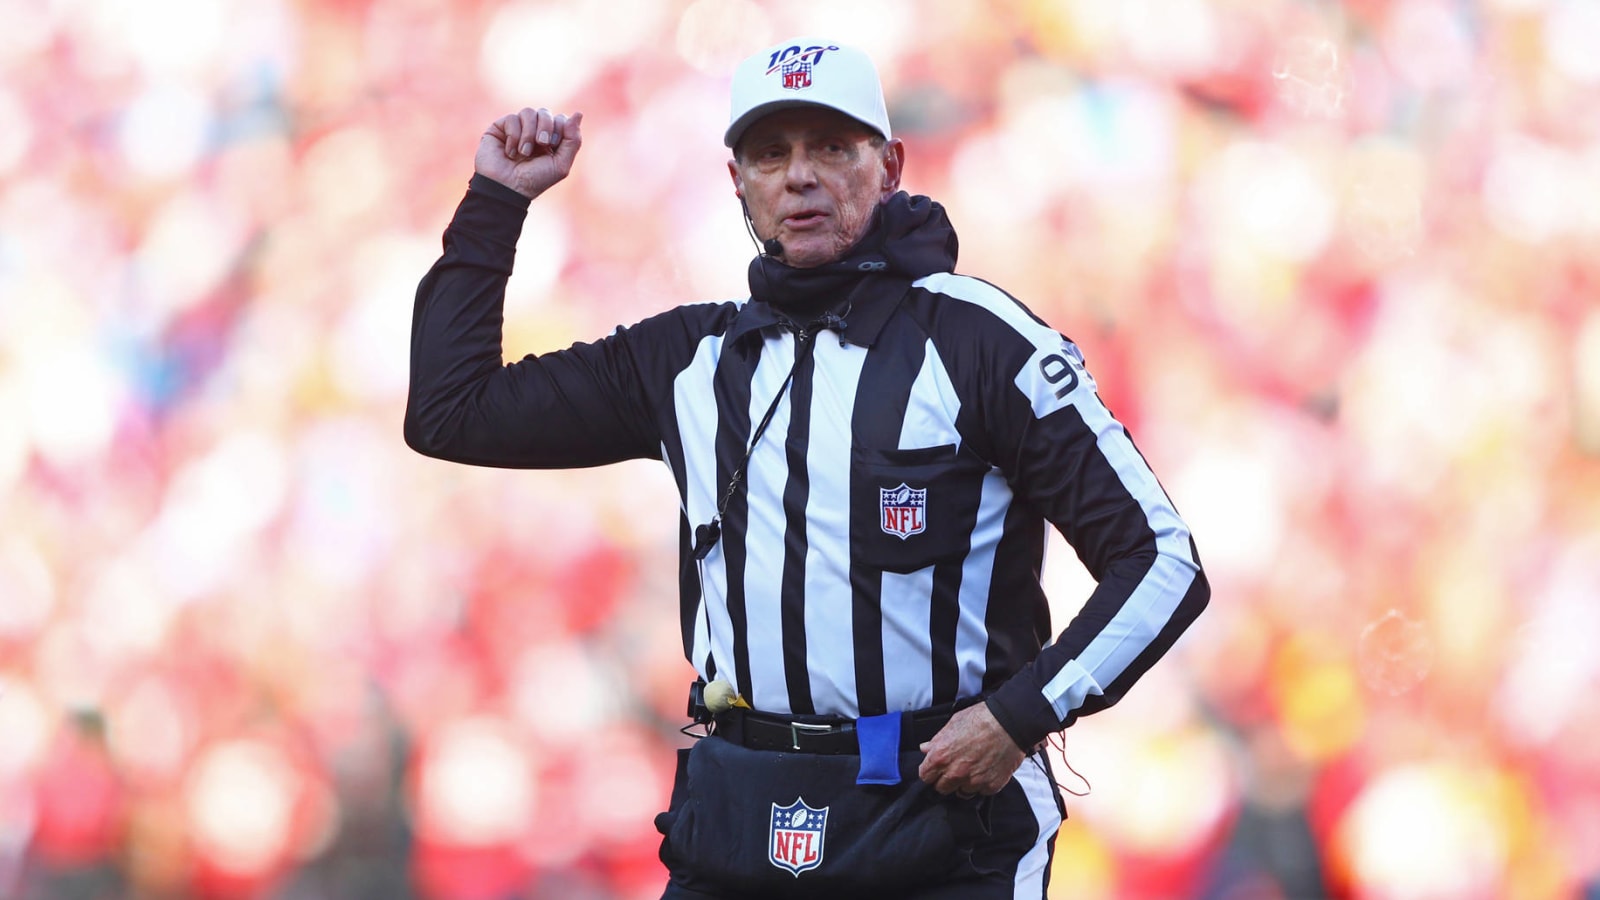 Report: NFL refs expected to wear masks, could use electronic whistles this season